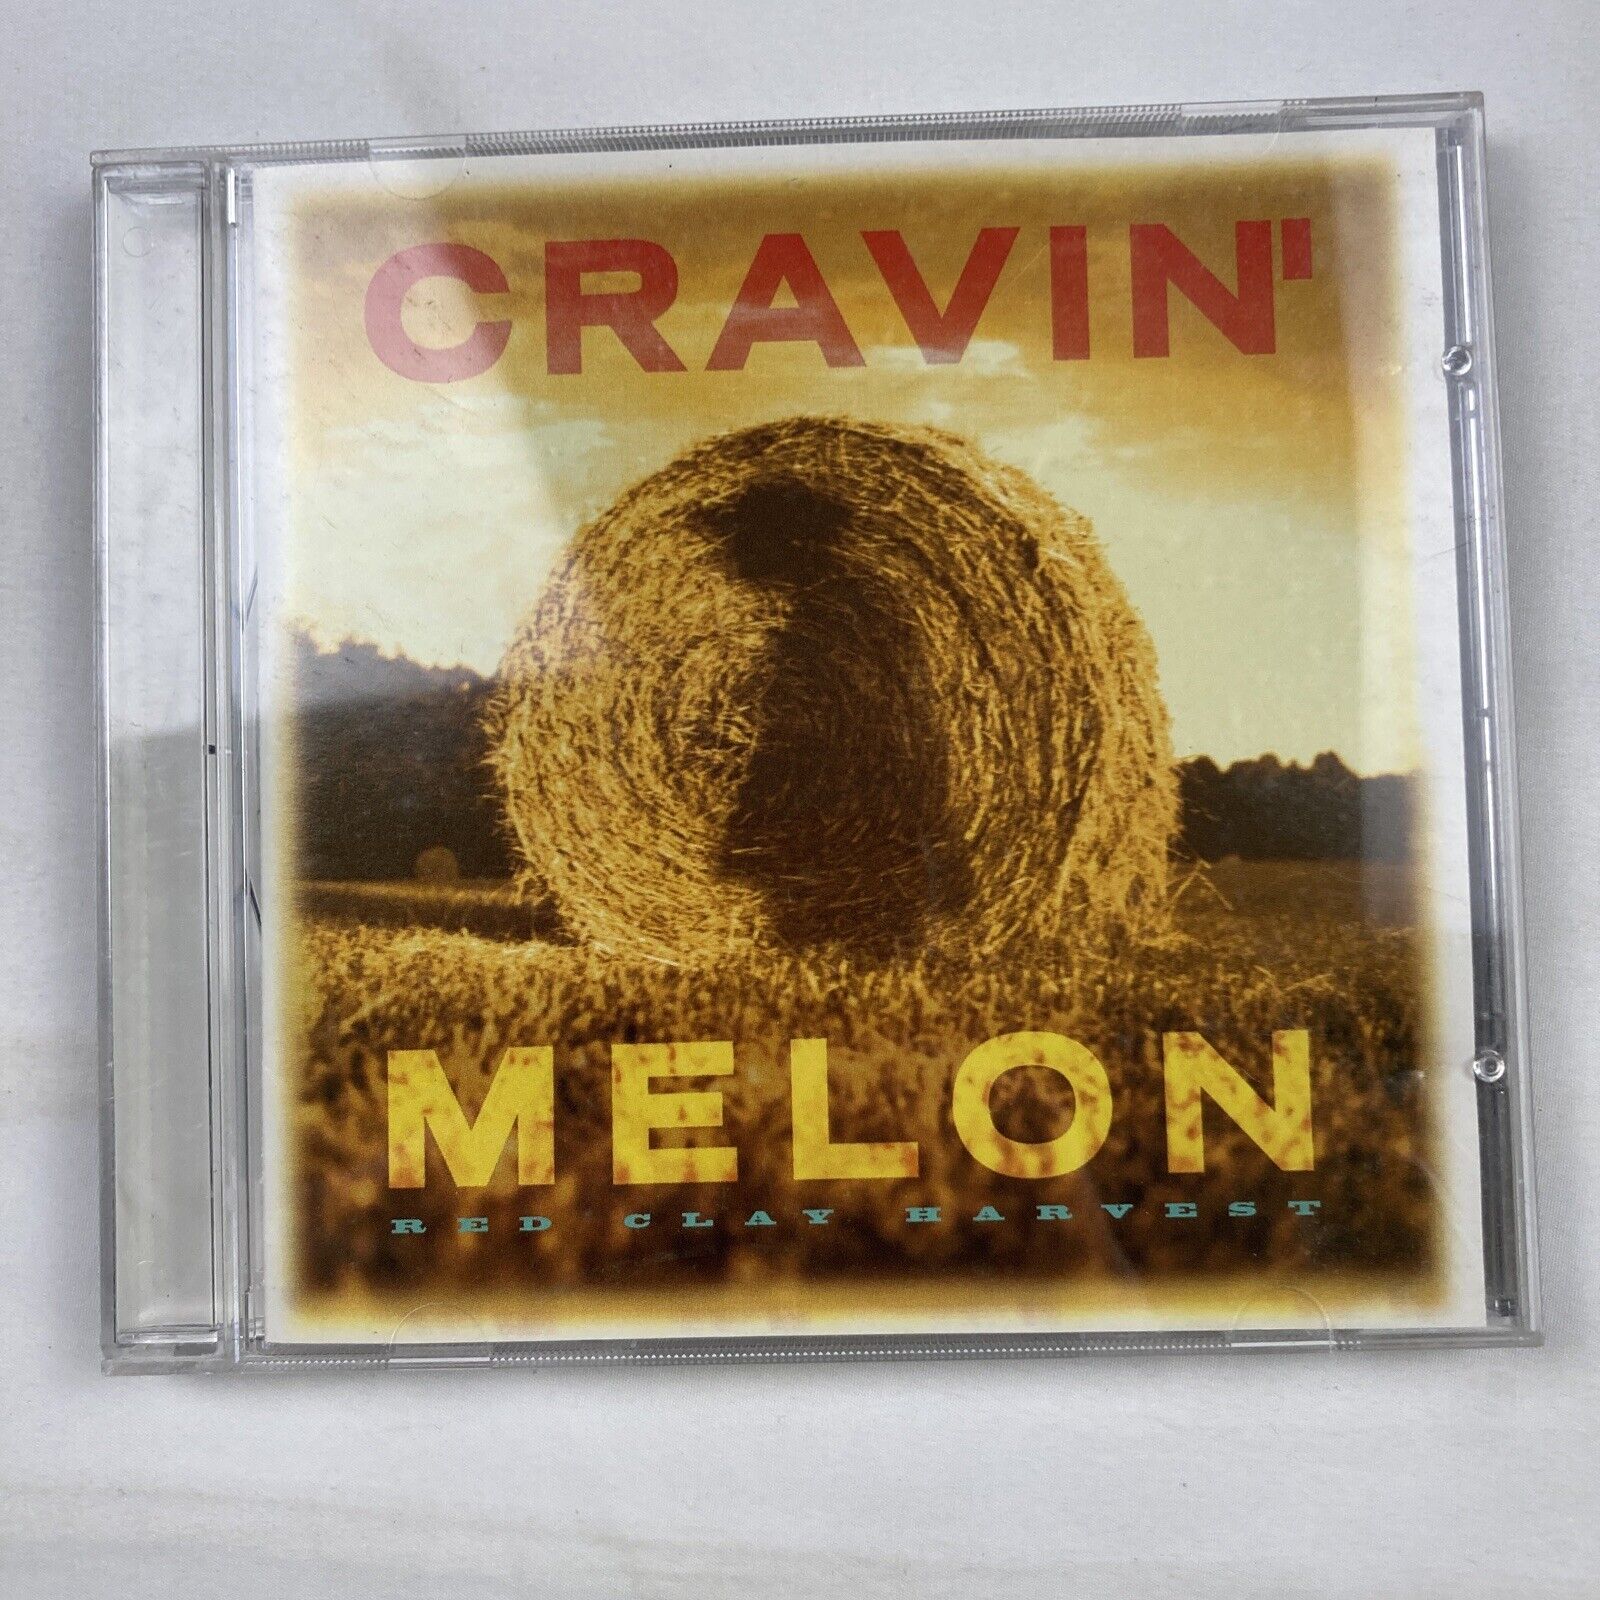 Red Clay Harvest by Cravin\' Melon (CD, Jan-1997, Mercury)